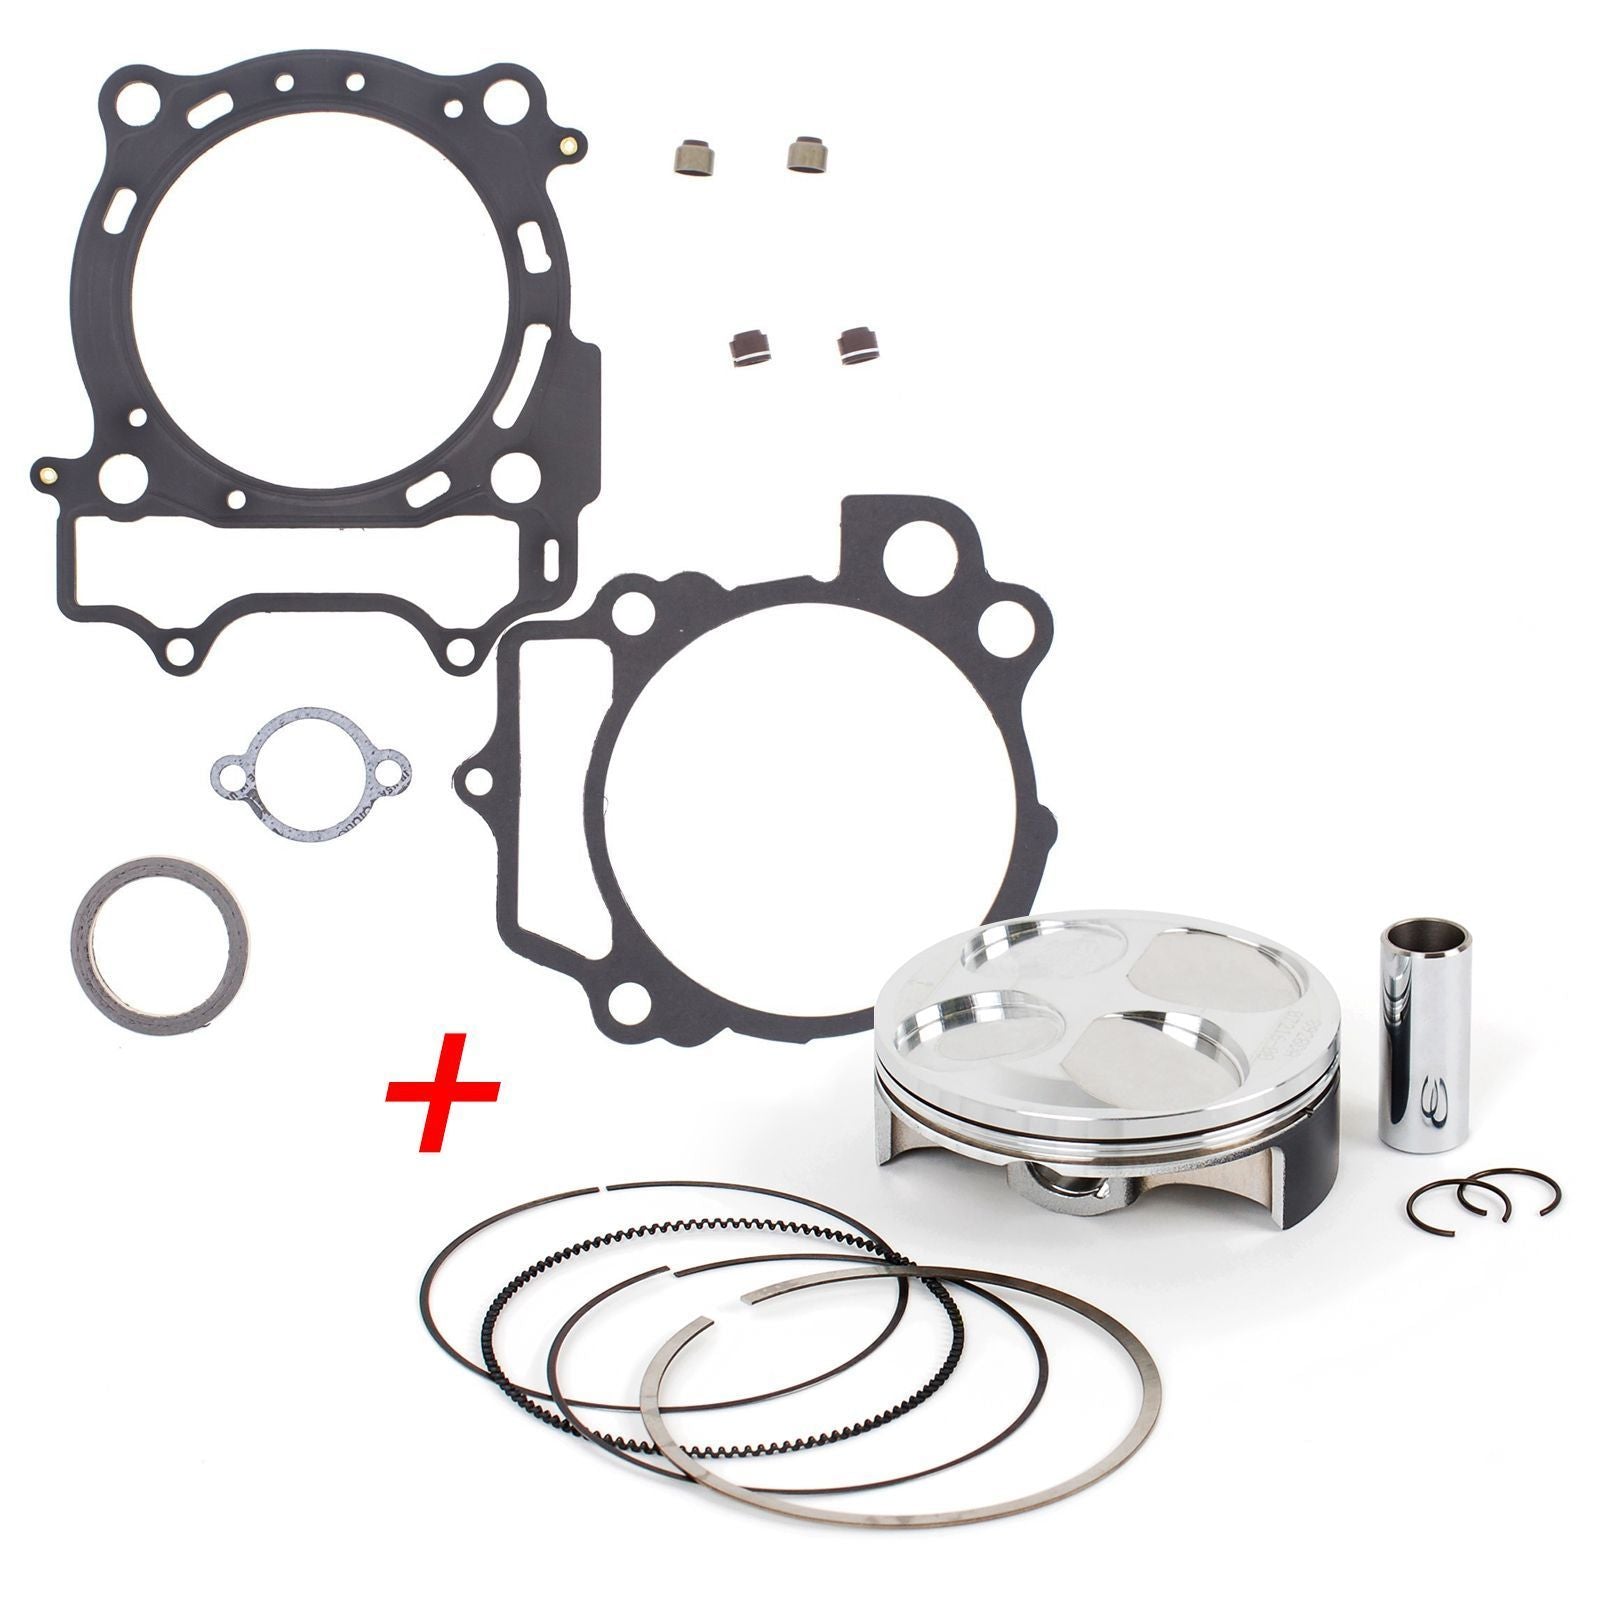 New Top End Rebuild Kit (A) For Yamaha WR426F 2001-2002 #ERTY032A